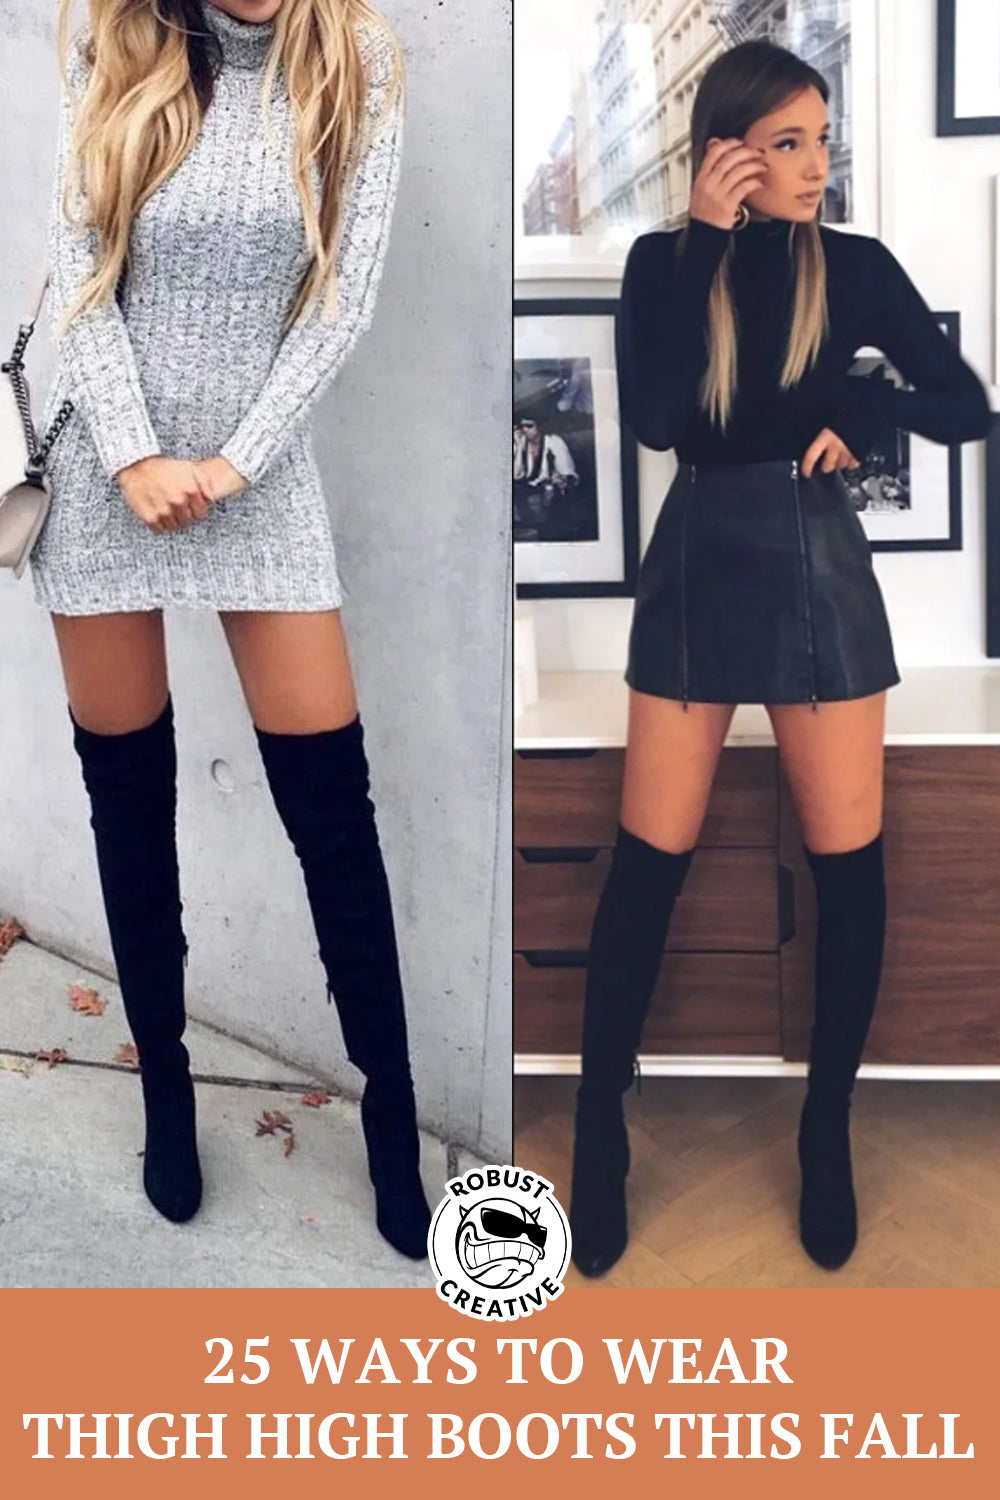 thigh high boots outfit. shorts with thigh high boots. night out outfit  Thigh  high boots outfit, High boots outfit, Shorts with thigh high boots